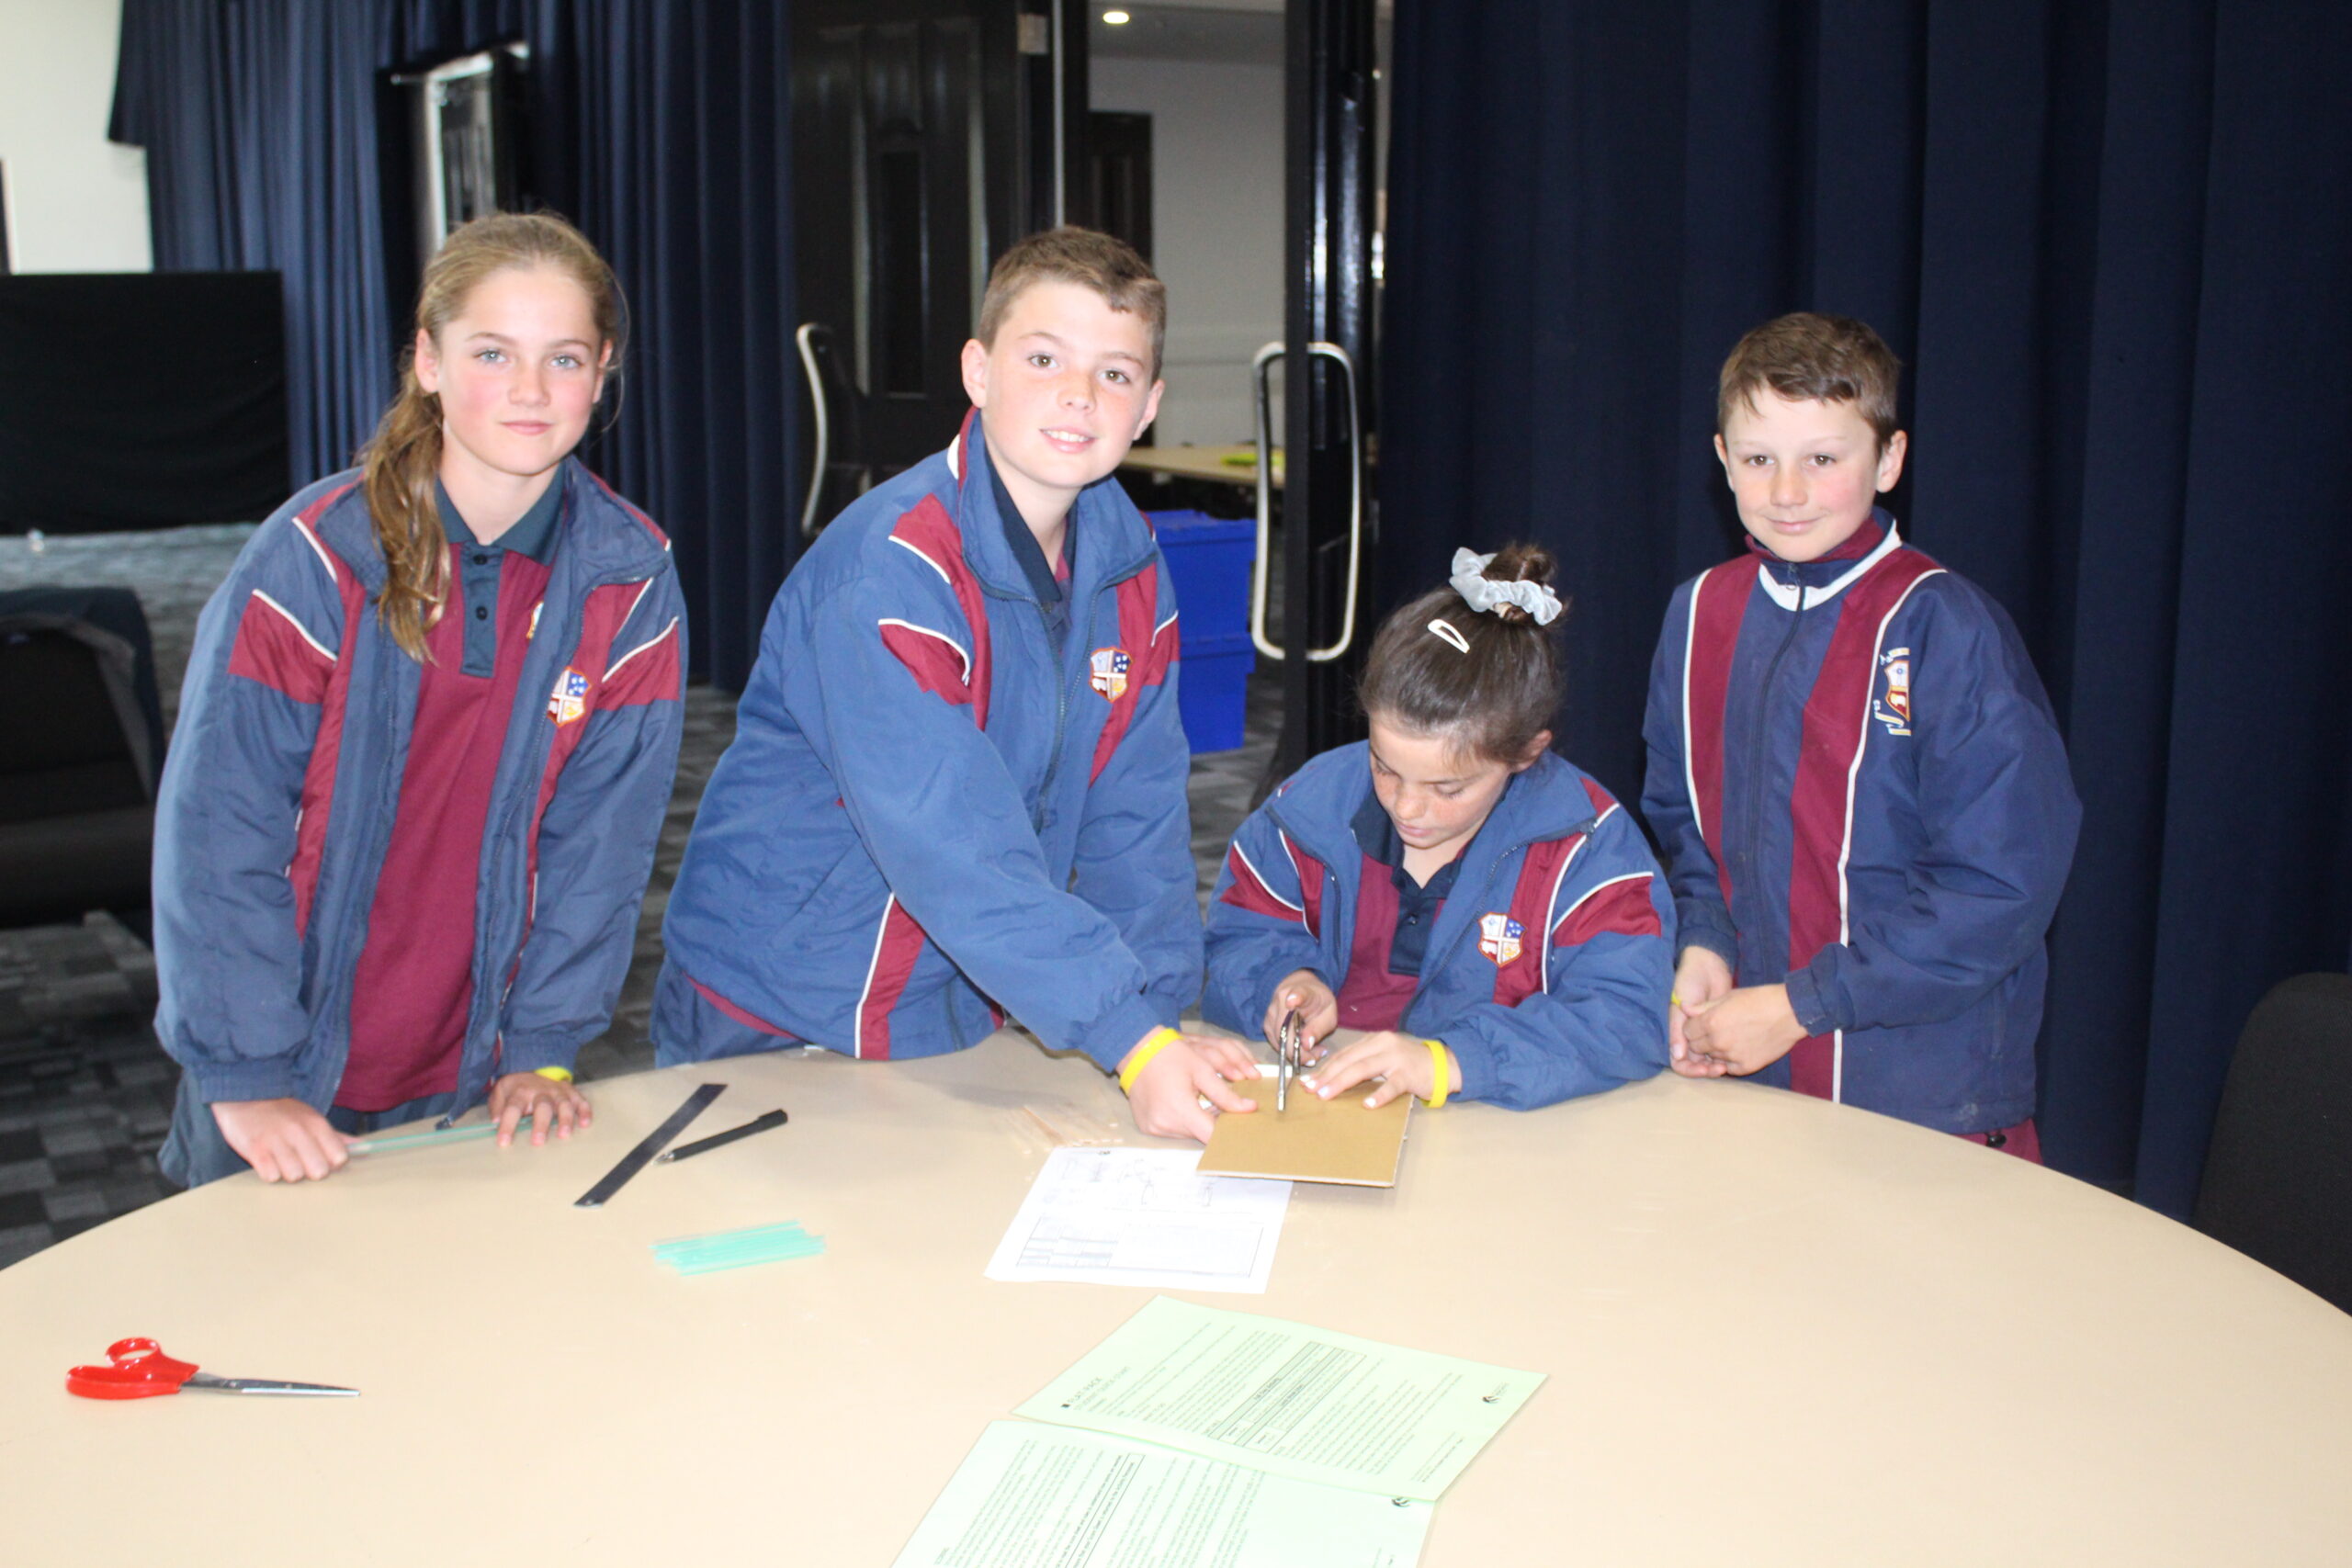 Anika Holmesby, Albie Wark, Indi Mitchell and Clancy Pickette (St. Lawrence’s, Coonabarabran).